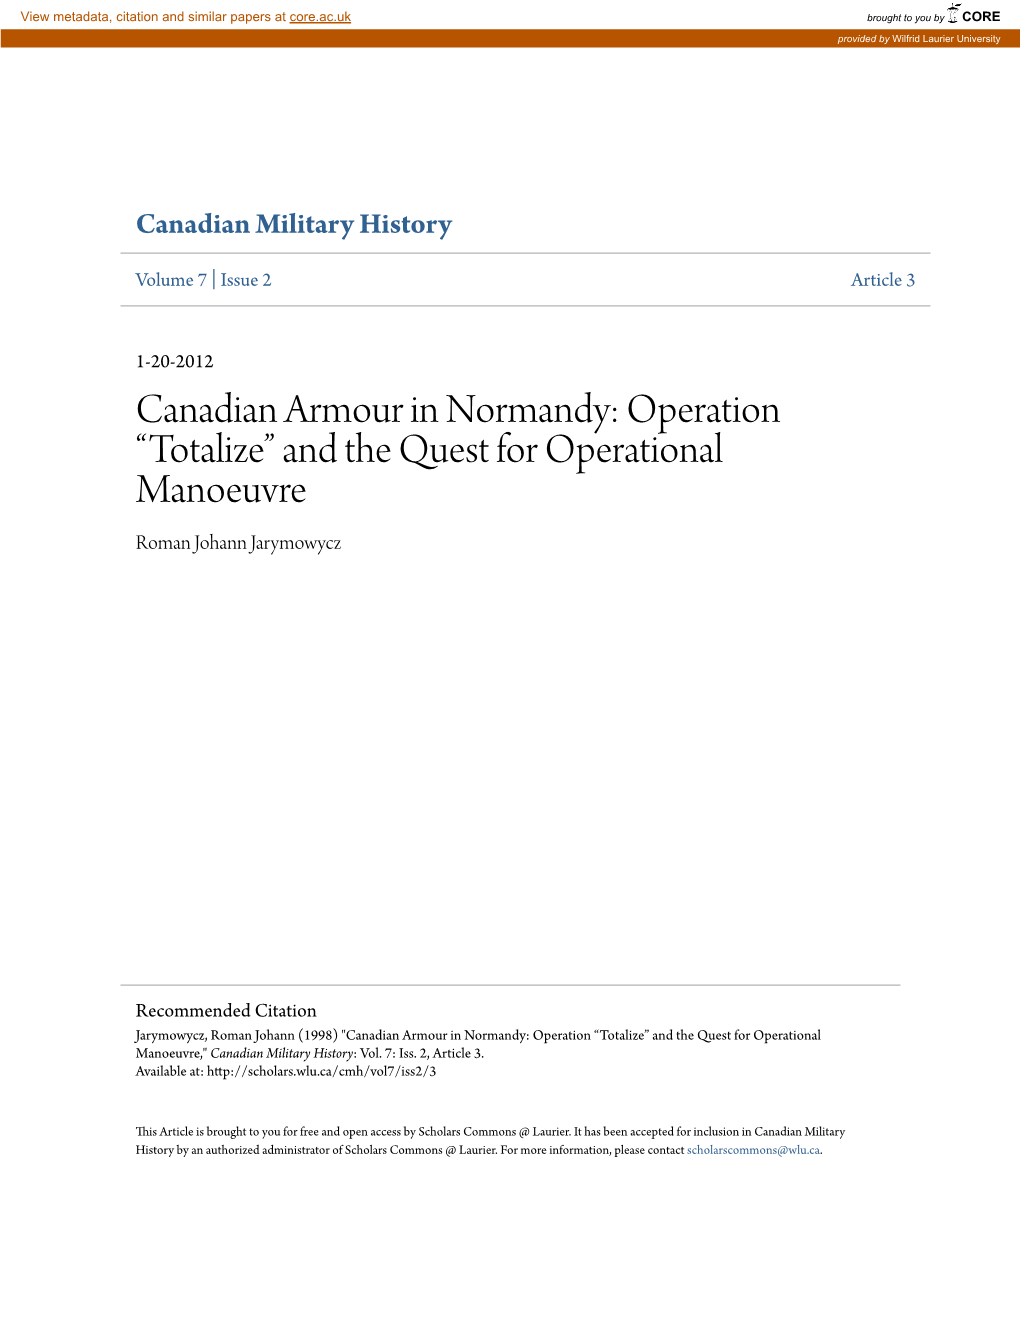 Canadian Armour in Normandy: Operation “Totalize” and the Quest for Operational Manoeuvre Roman Johann Jarymowycz